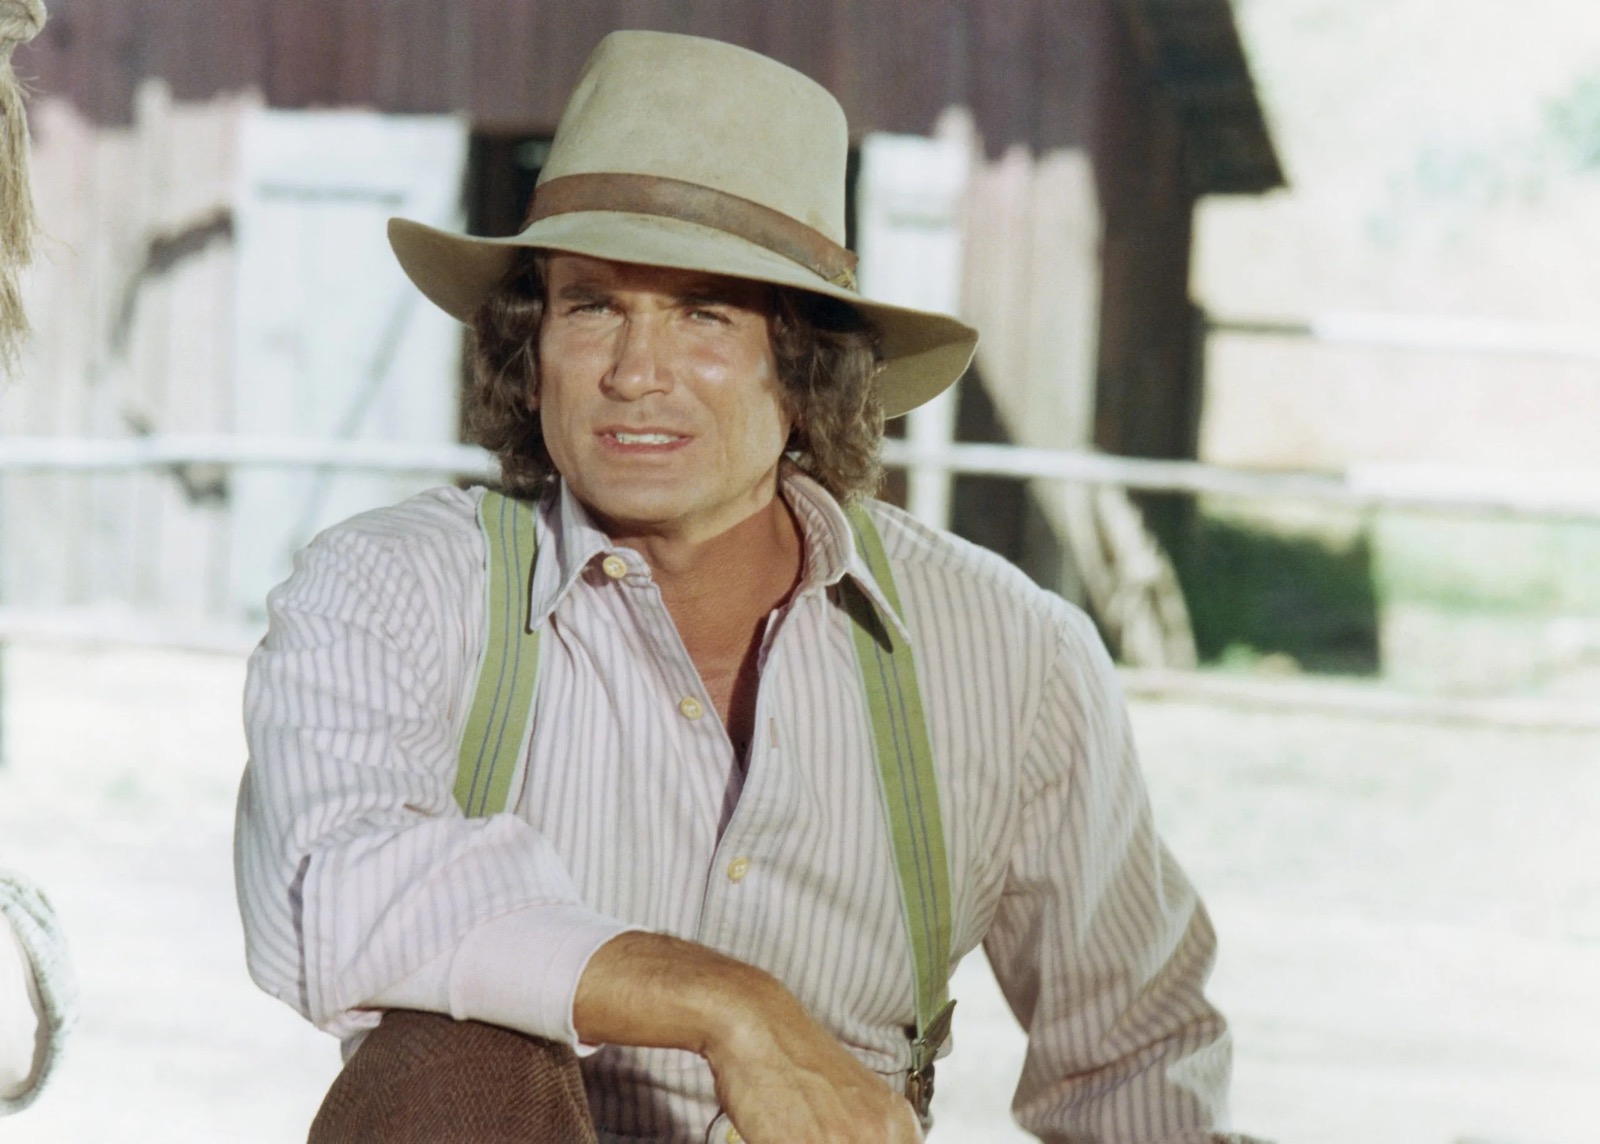 Classic TV Dads Quiz 👔: Match Them To Their Iconic Shows! Michael Landon as Charles Ingalls on Little House on the Prairie